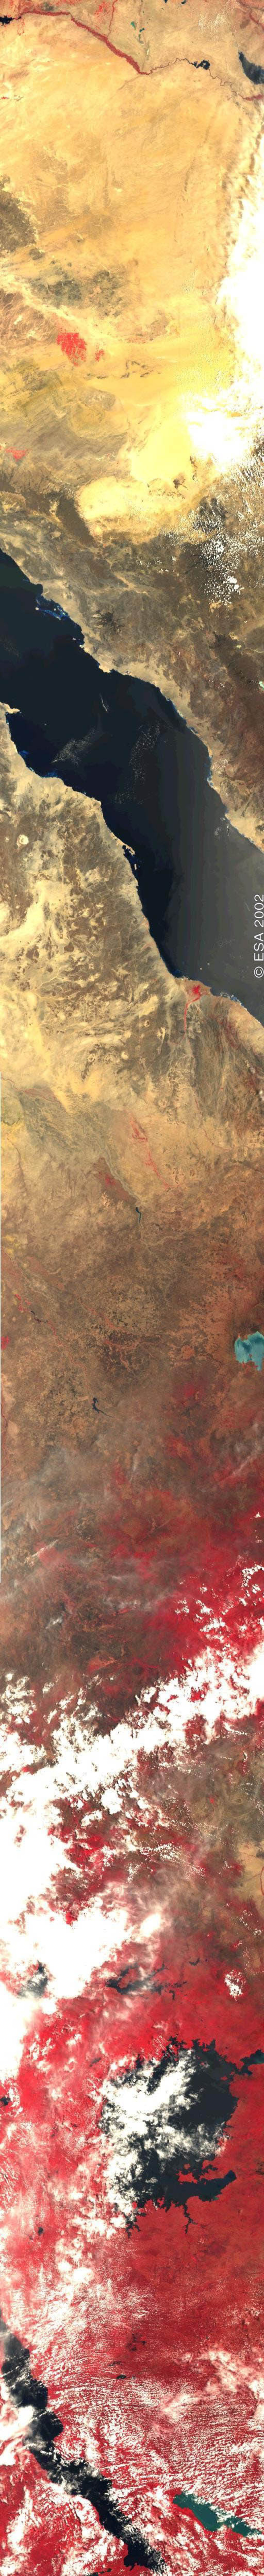 East Africa and Middle East - AATSR - 11 April 2002